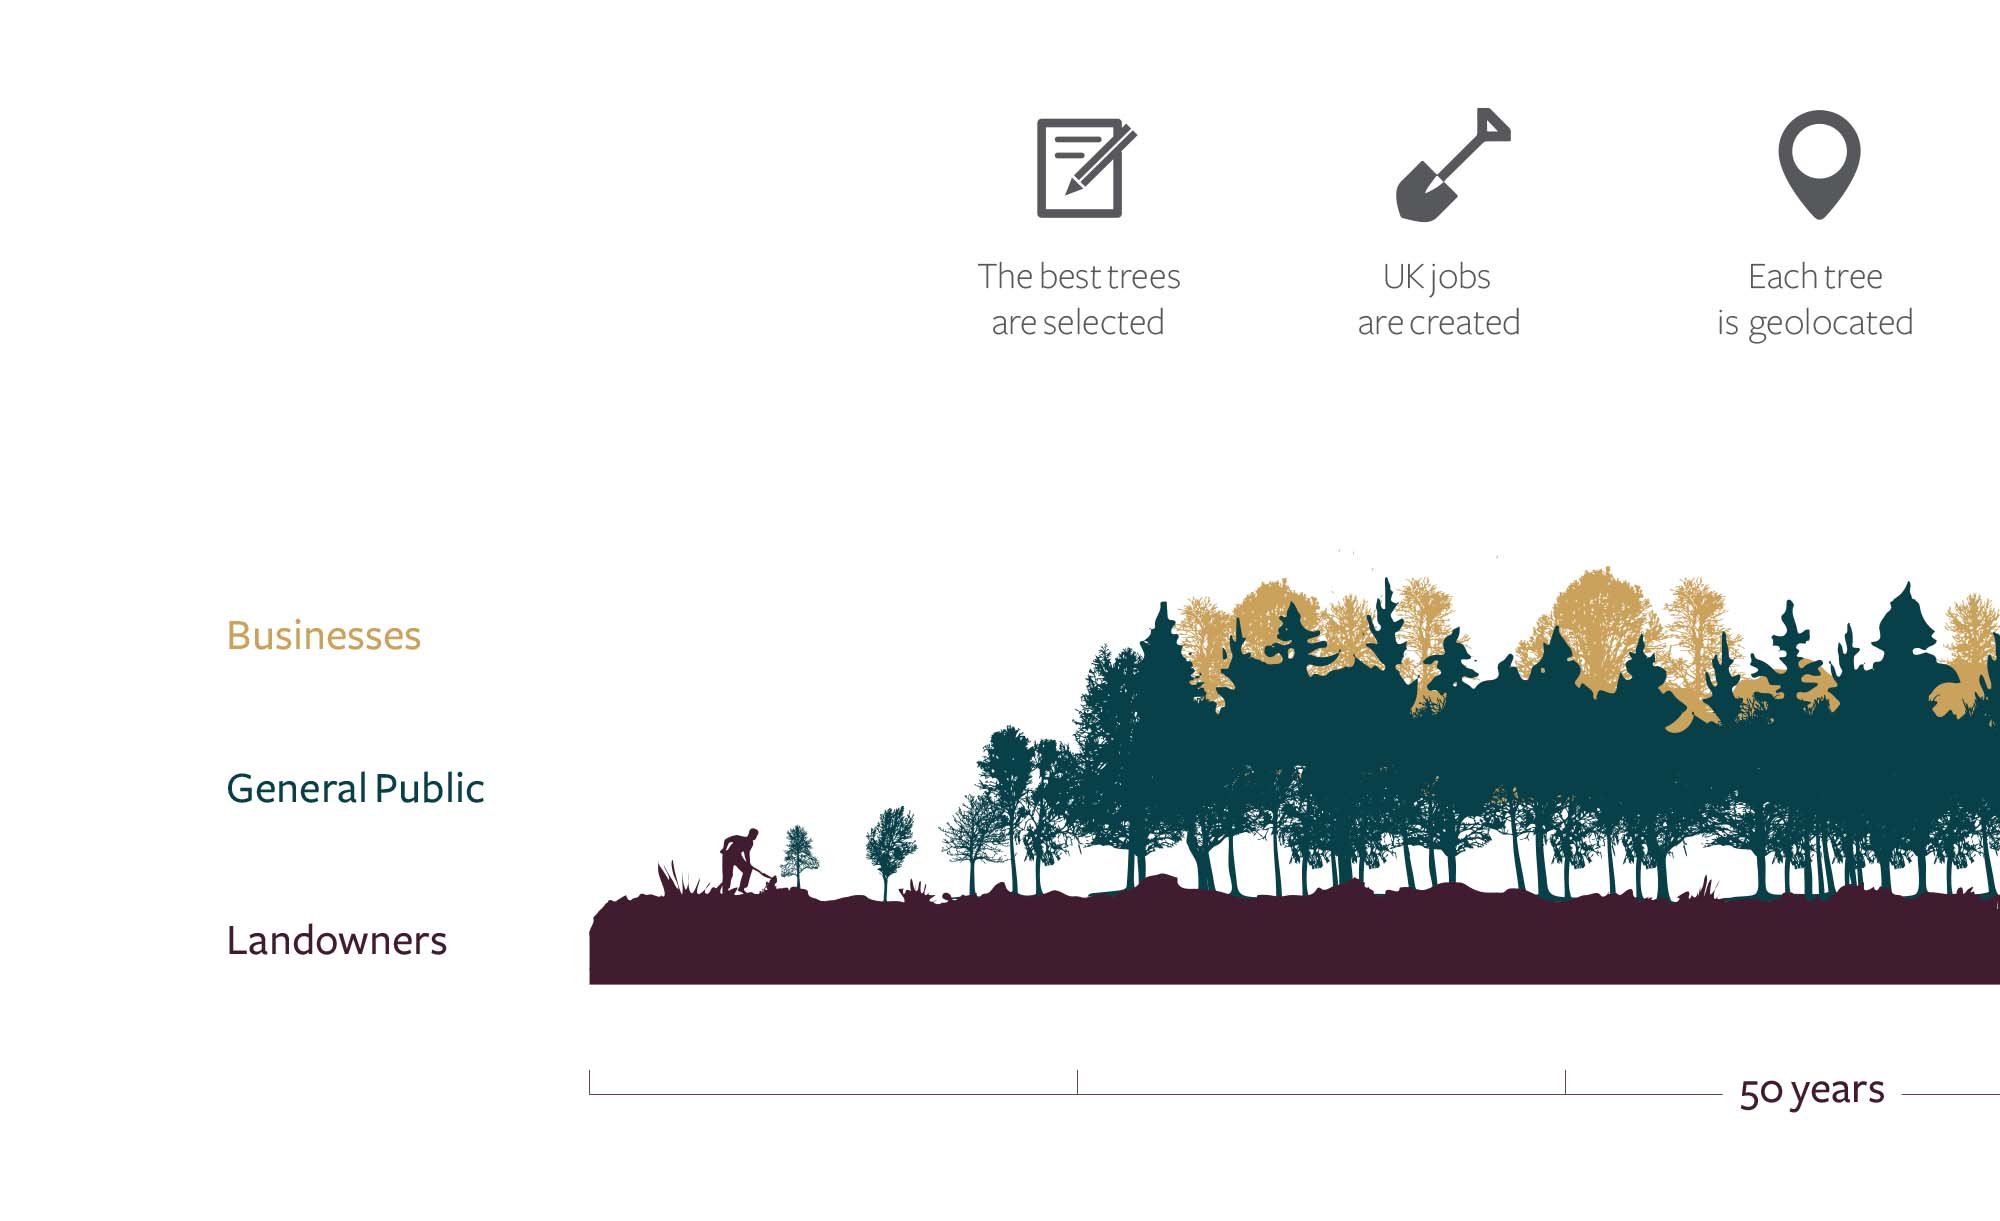 How 9trees work with business, landowners and general public to achieve their goals